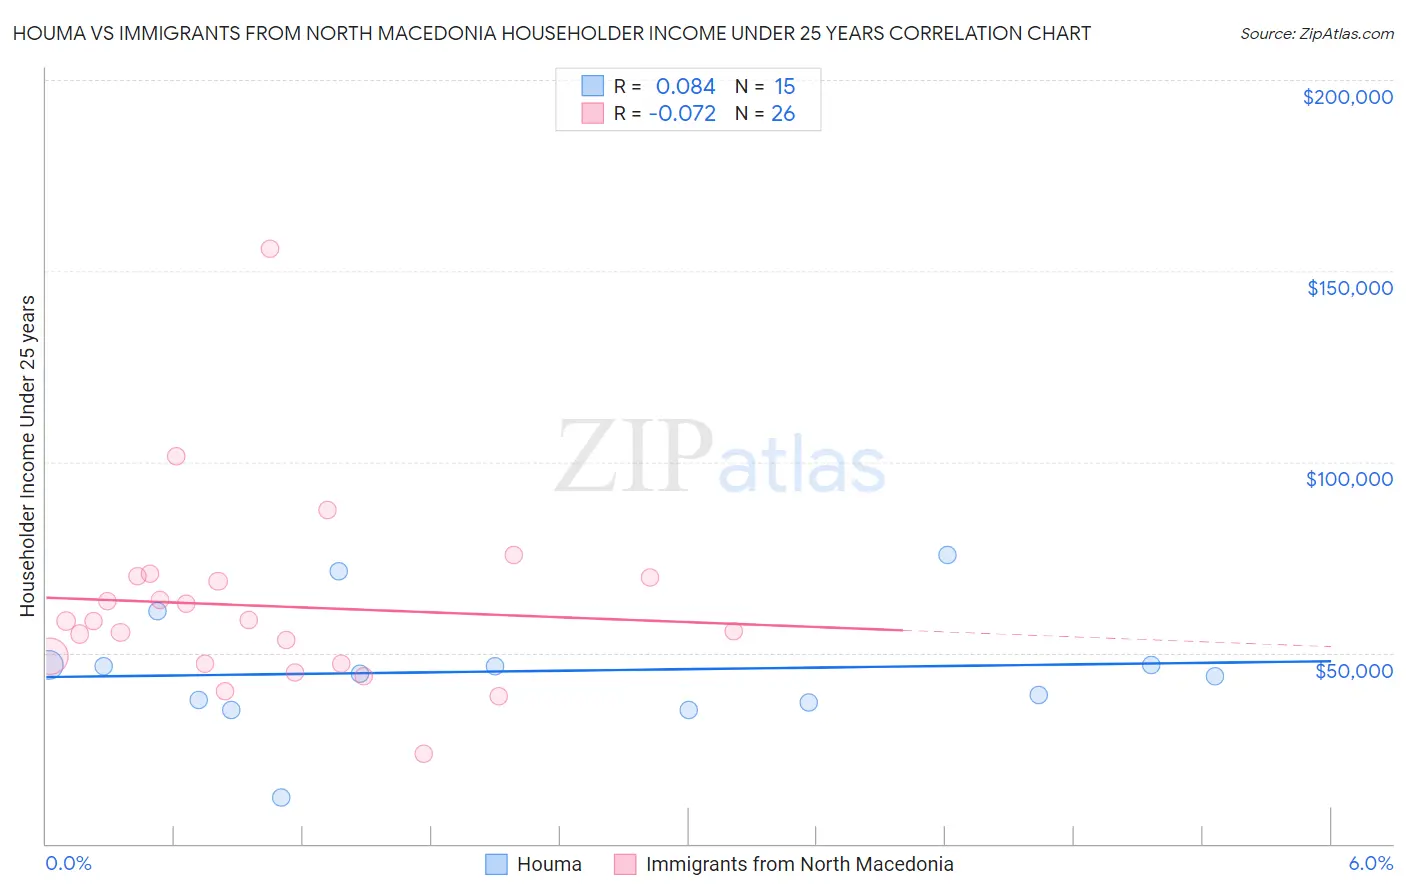 Houma vs Immigrants from North Macedonia Householder Income Under 25 years